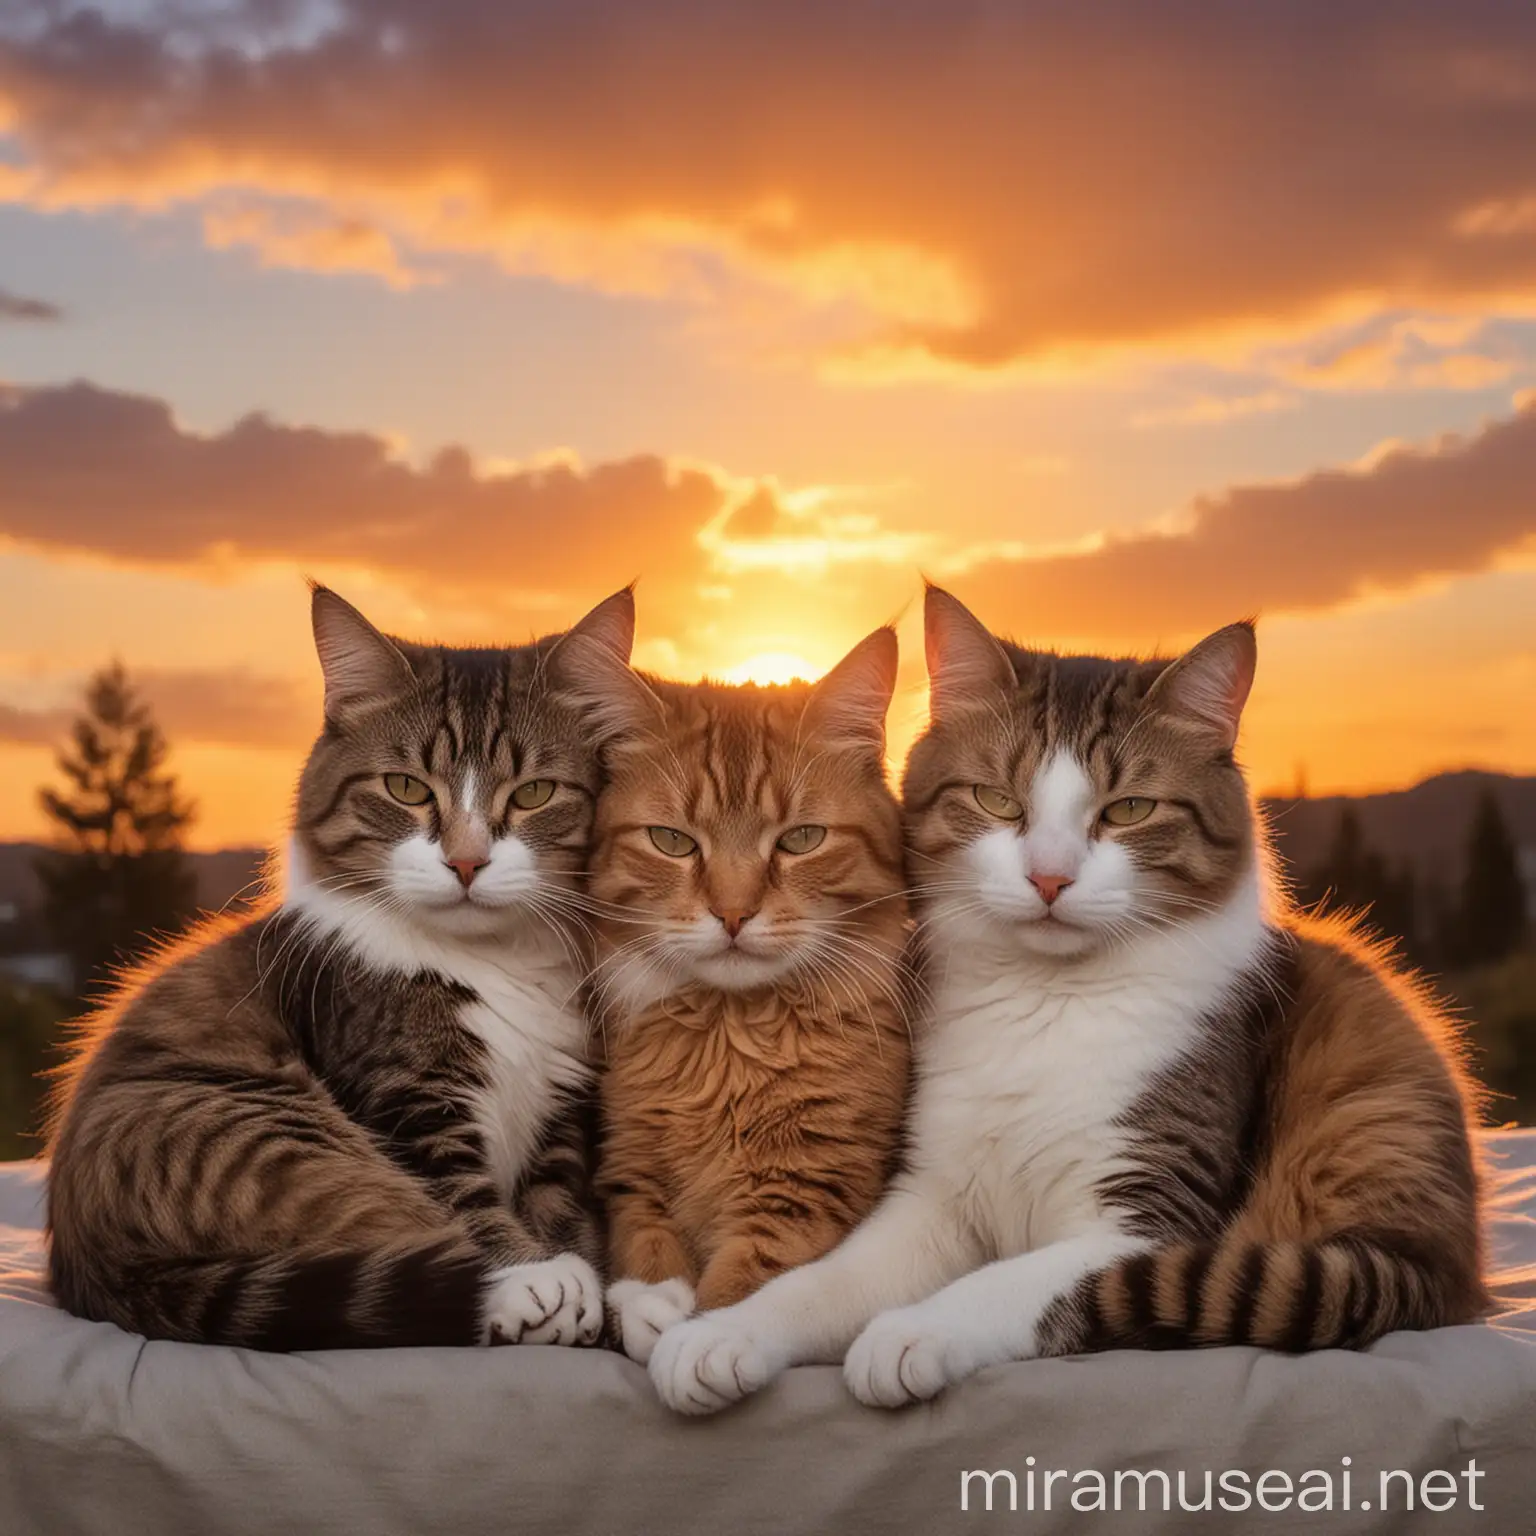 Cats Cuddling at Sunset Adorable Feline Affection in the Glow of Dusk